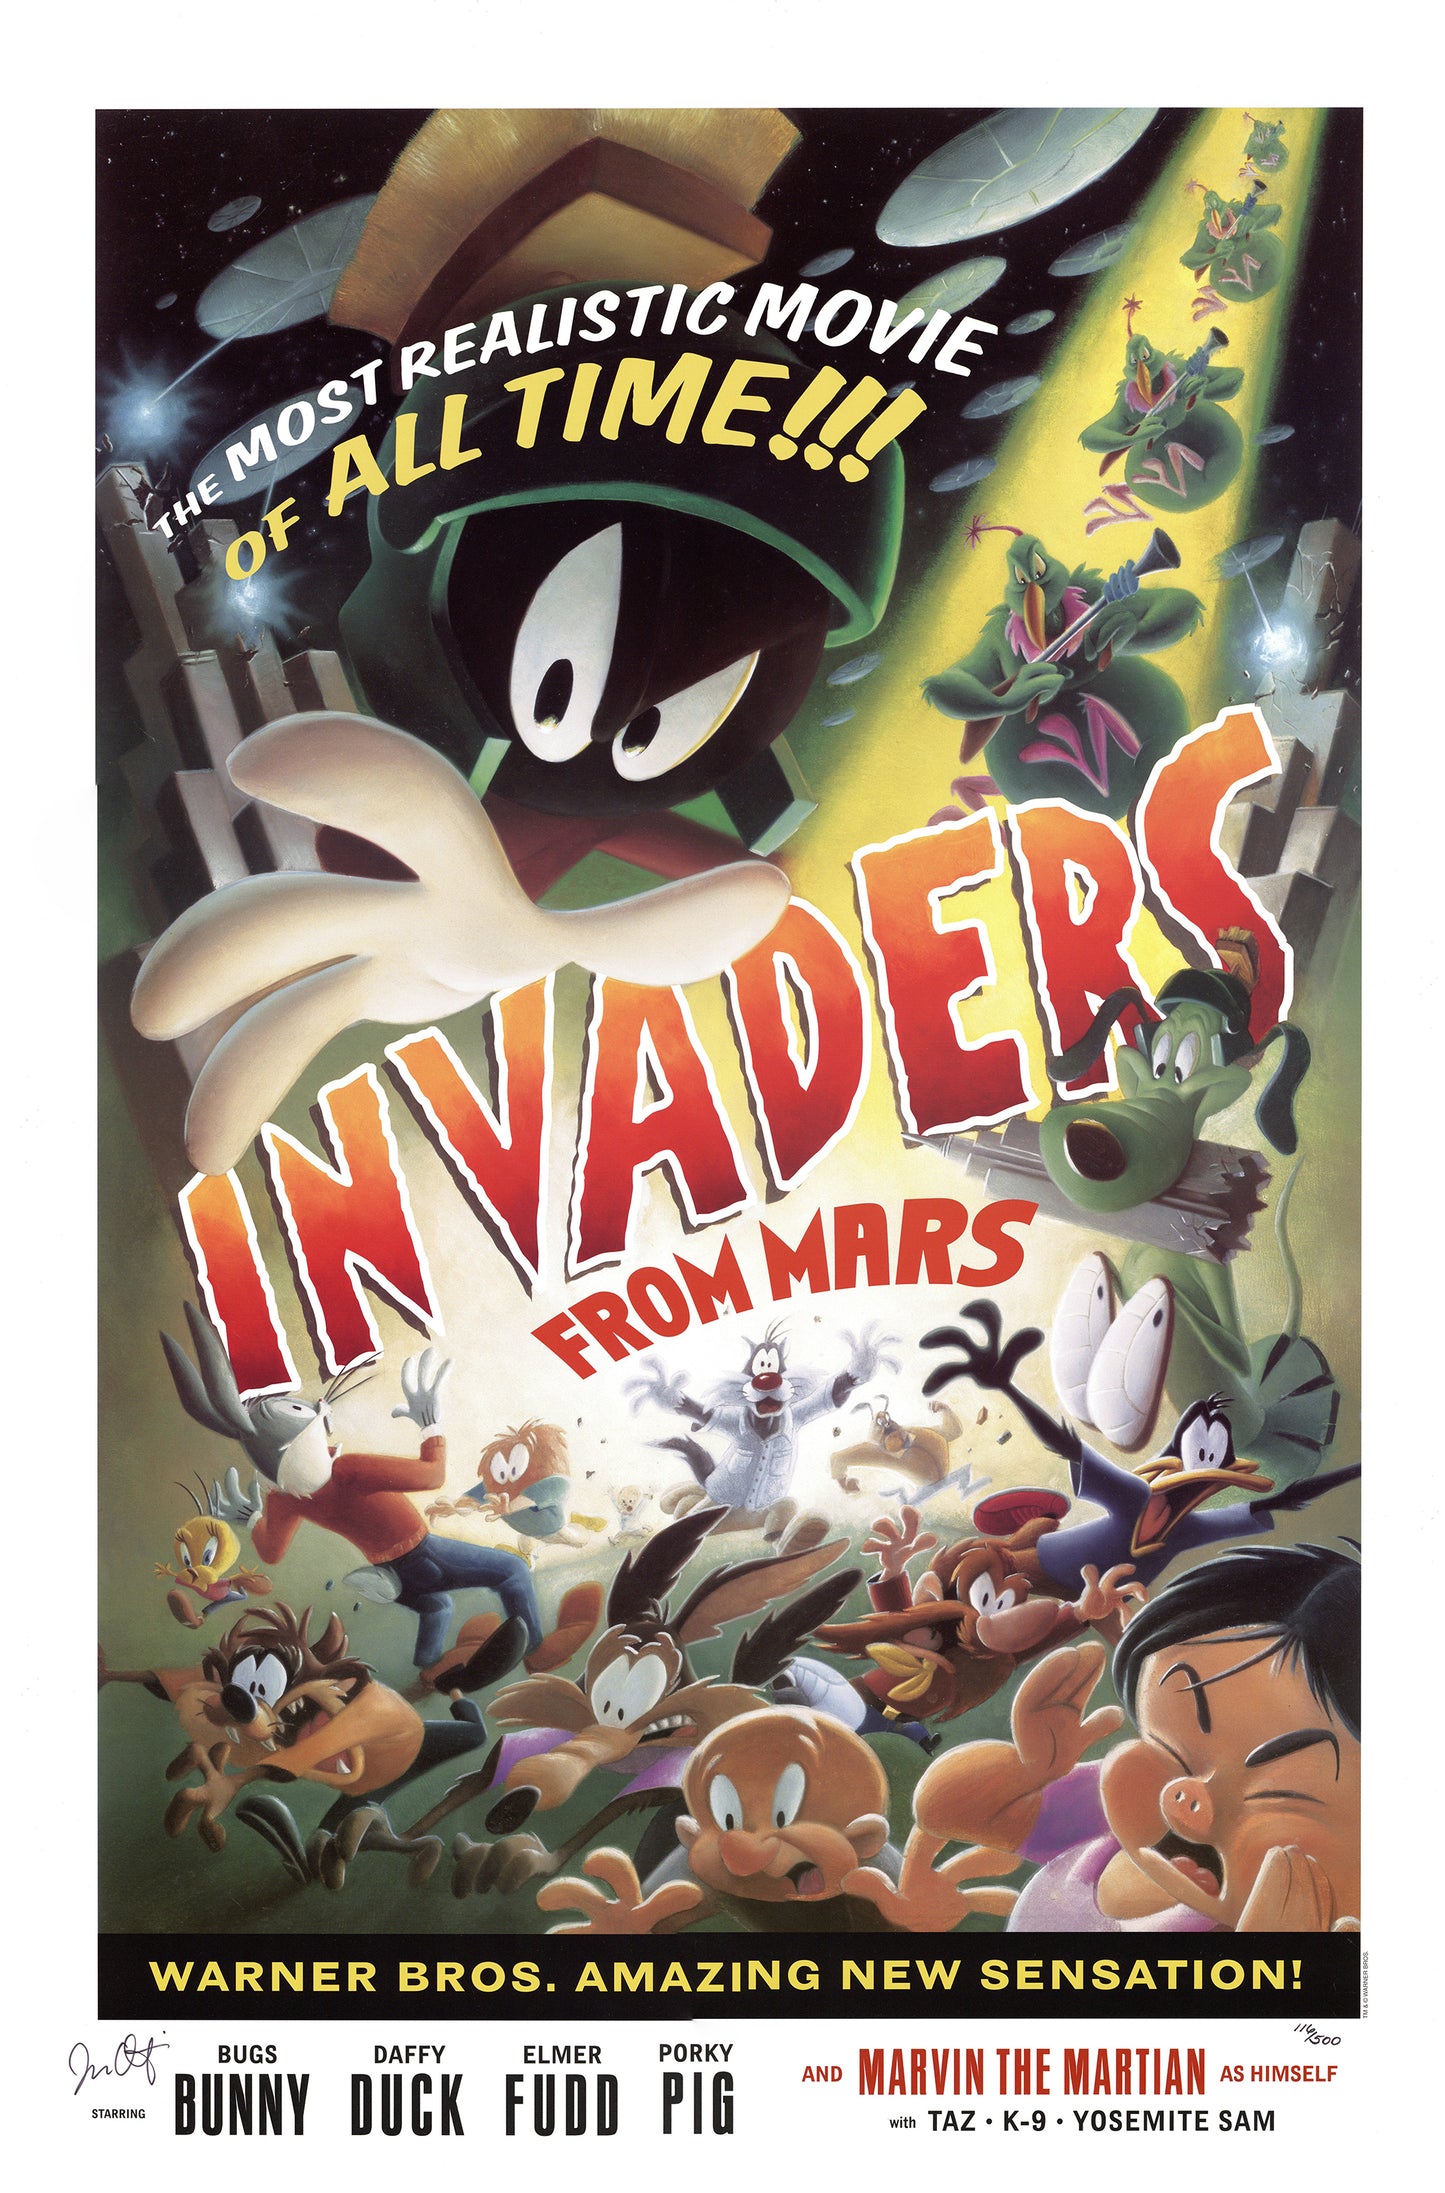 Invaders From Mars!